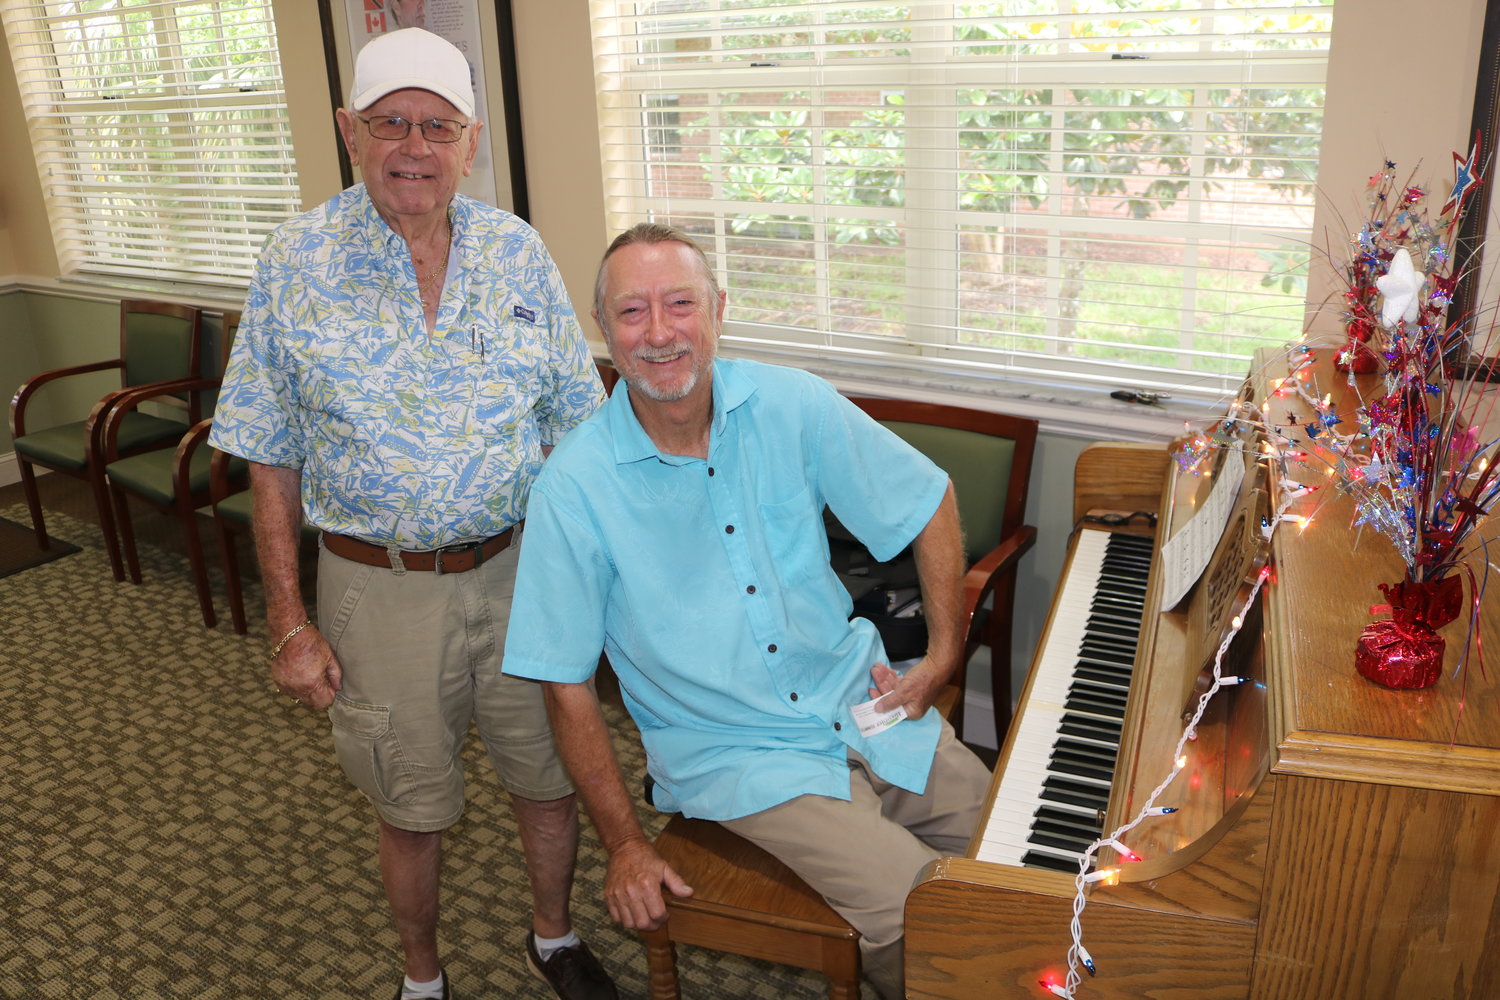 Donnell Miniard, right, performed musical selections on a piano for the grand reopening of THE PLAYERS Community Senior Center. Miles Stonesifer, left, took some time to chat with Miniard between sets.